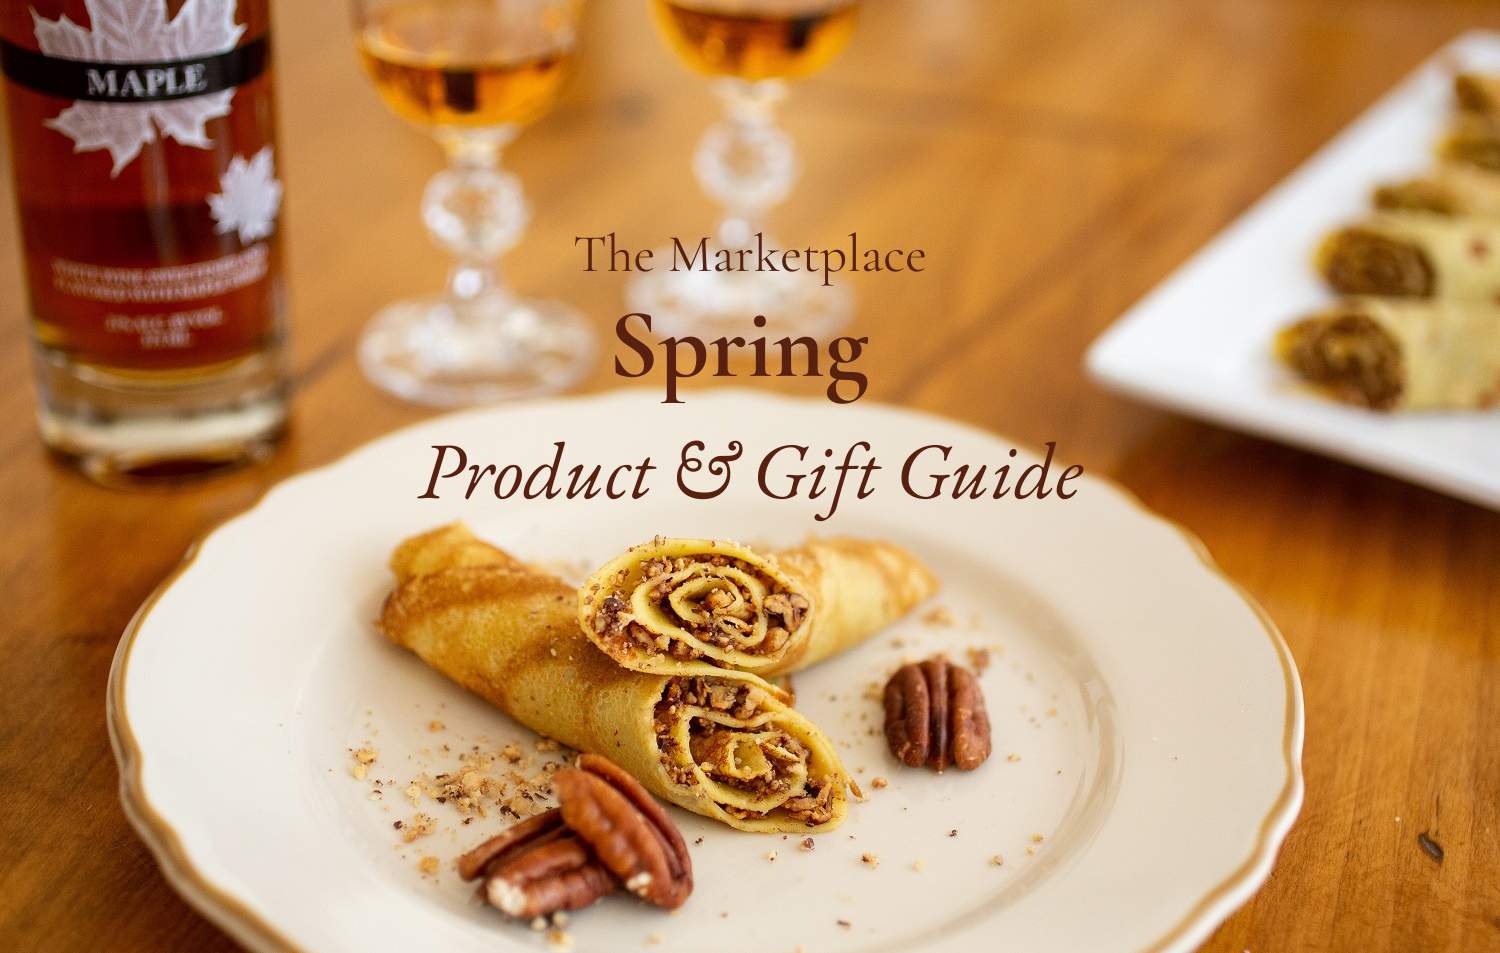 Maple liqueur and French crepes at Johnson Estate Winery